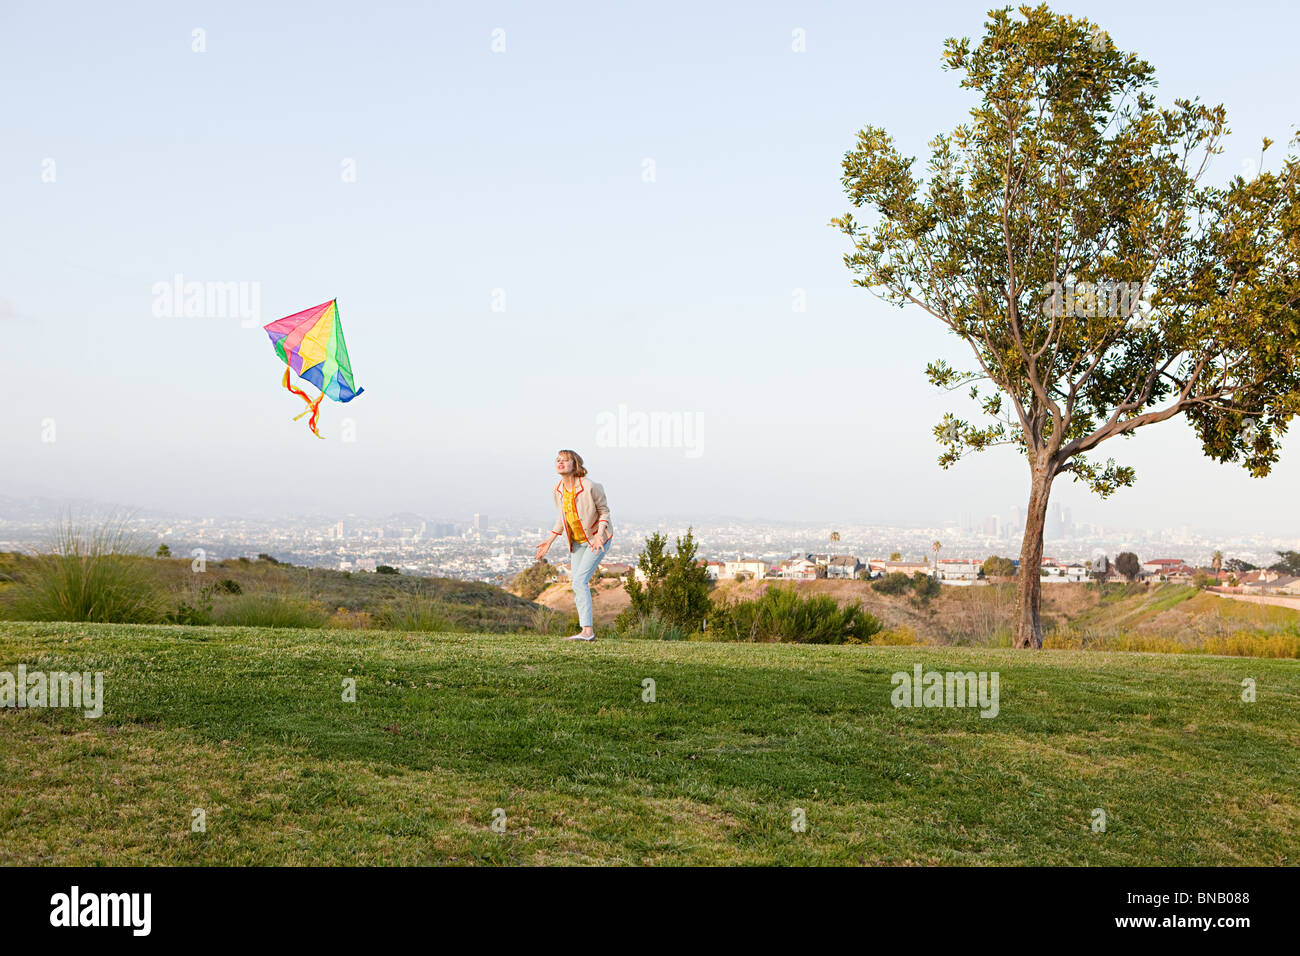 Young woman flying a kite in a field Stock Photo